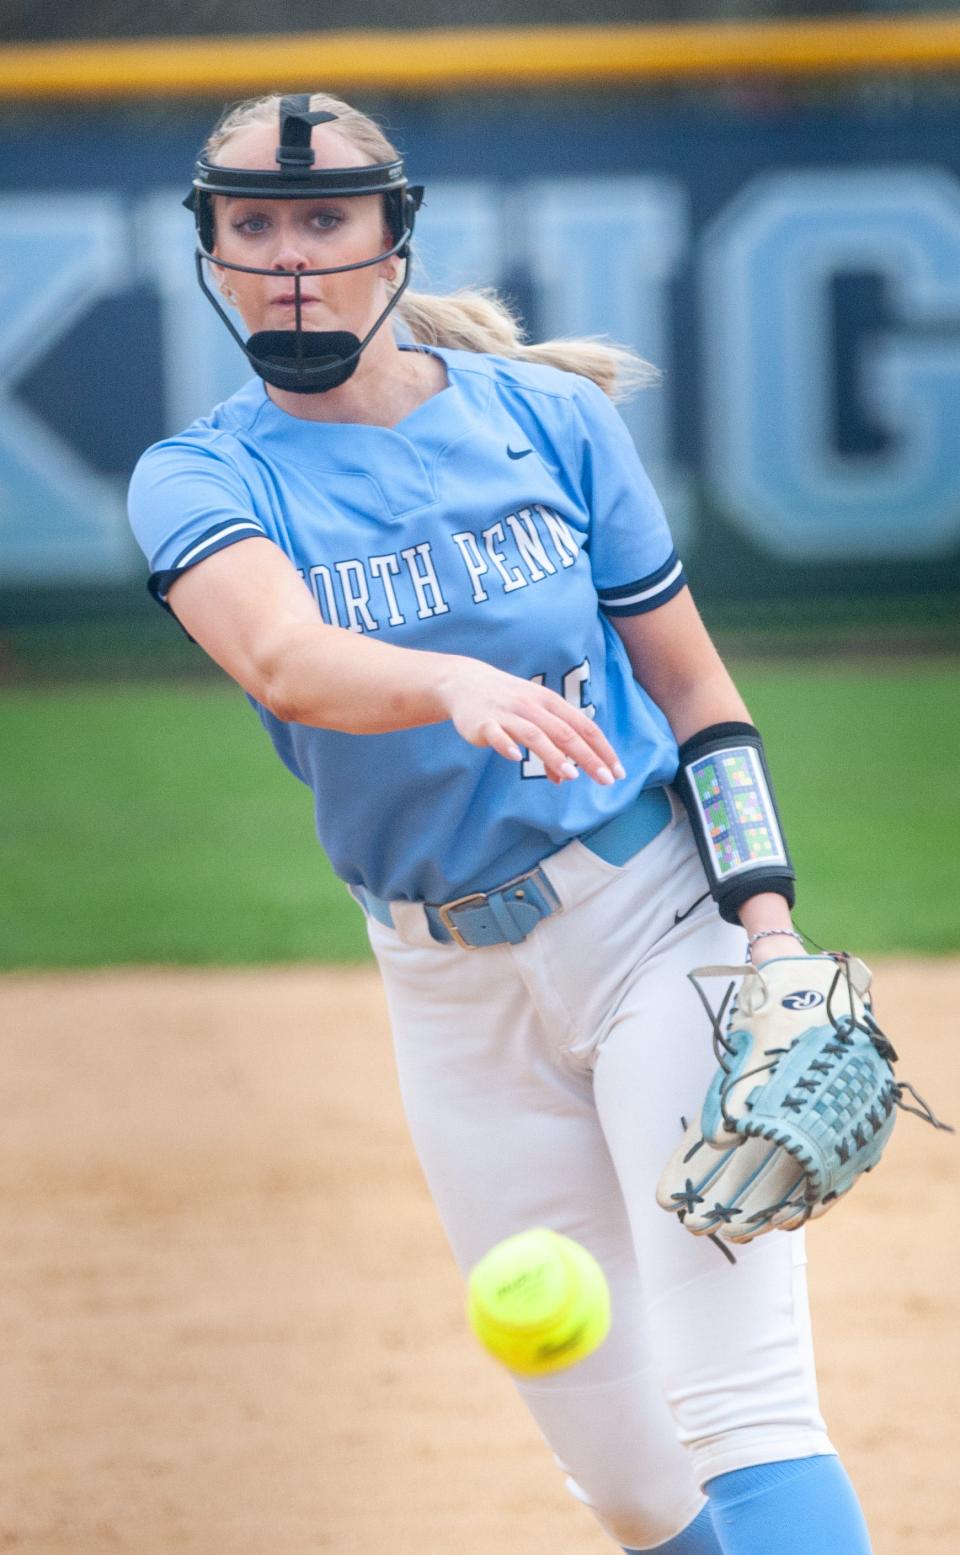 North Penn’s Bella Nunn #16 makes a pitch in the 3rd inning of the Pennsbury at North Penn girls softball game Thursday, April 11, 2024 at North Penn High School in Towamencin, Pennsylvania. North Penn defeated Pennsbury 9-2. (WILLIAM THOMAS CAIN/For The Courier Times)